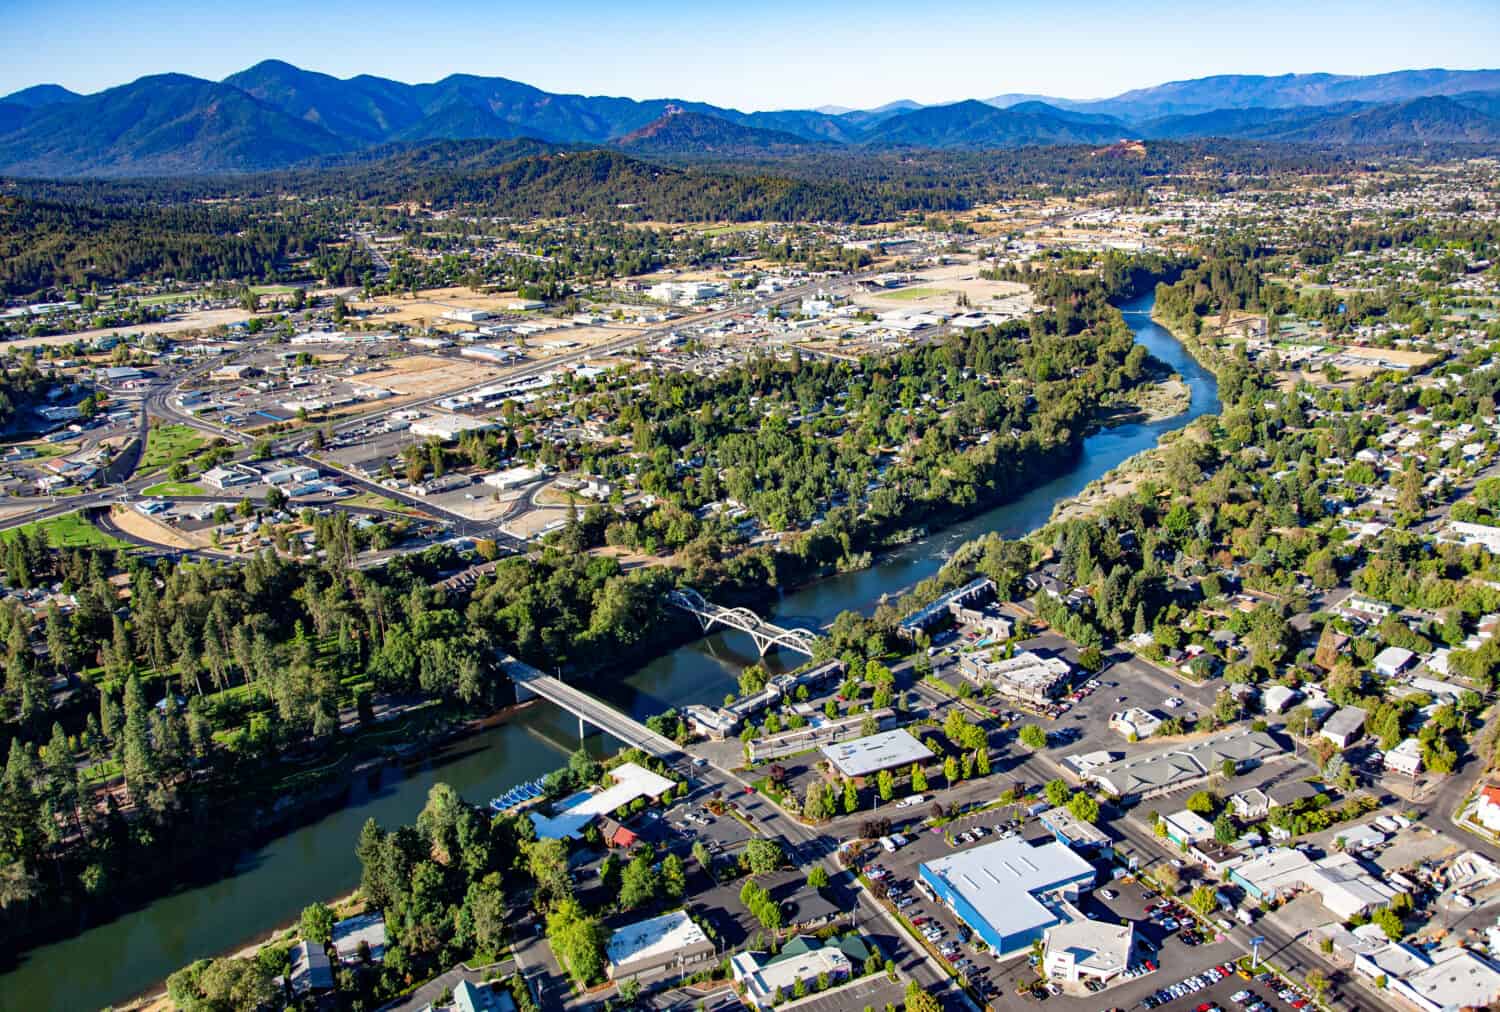 Aerial view of downtown Grants Pass with the Caveman concrete arch bridge and the 7th street bridge crossing the Rogue River